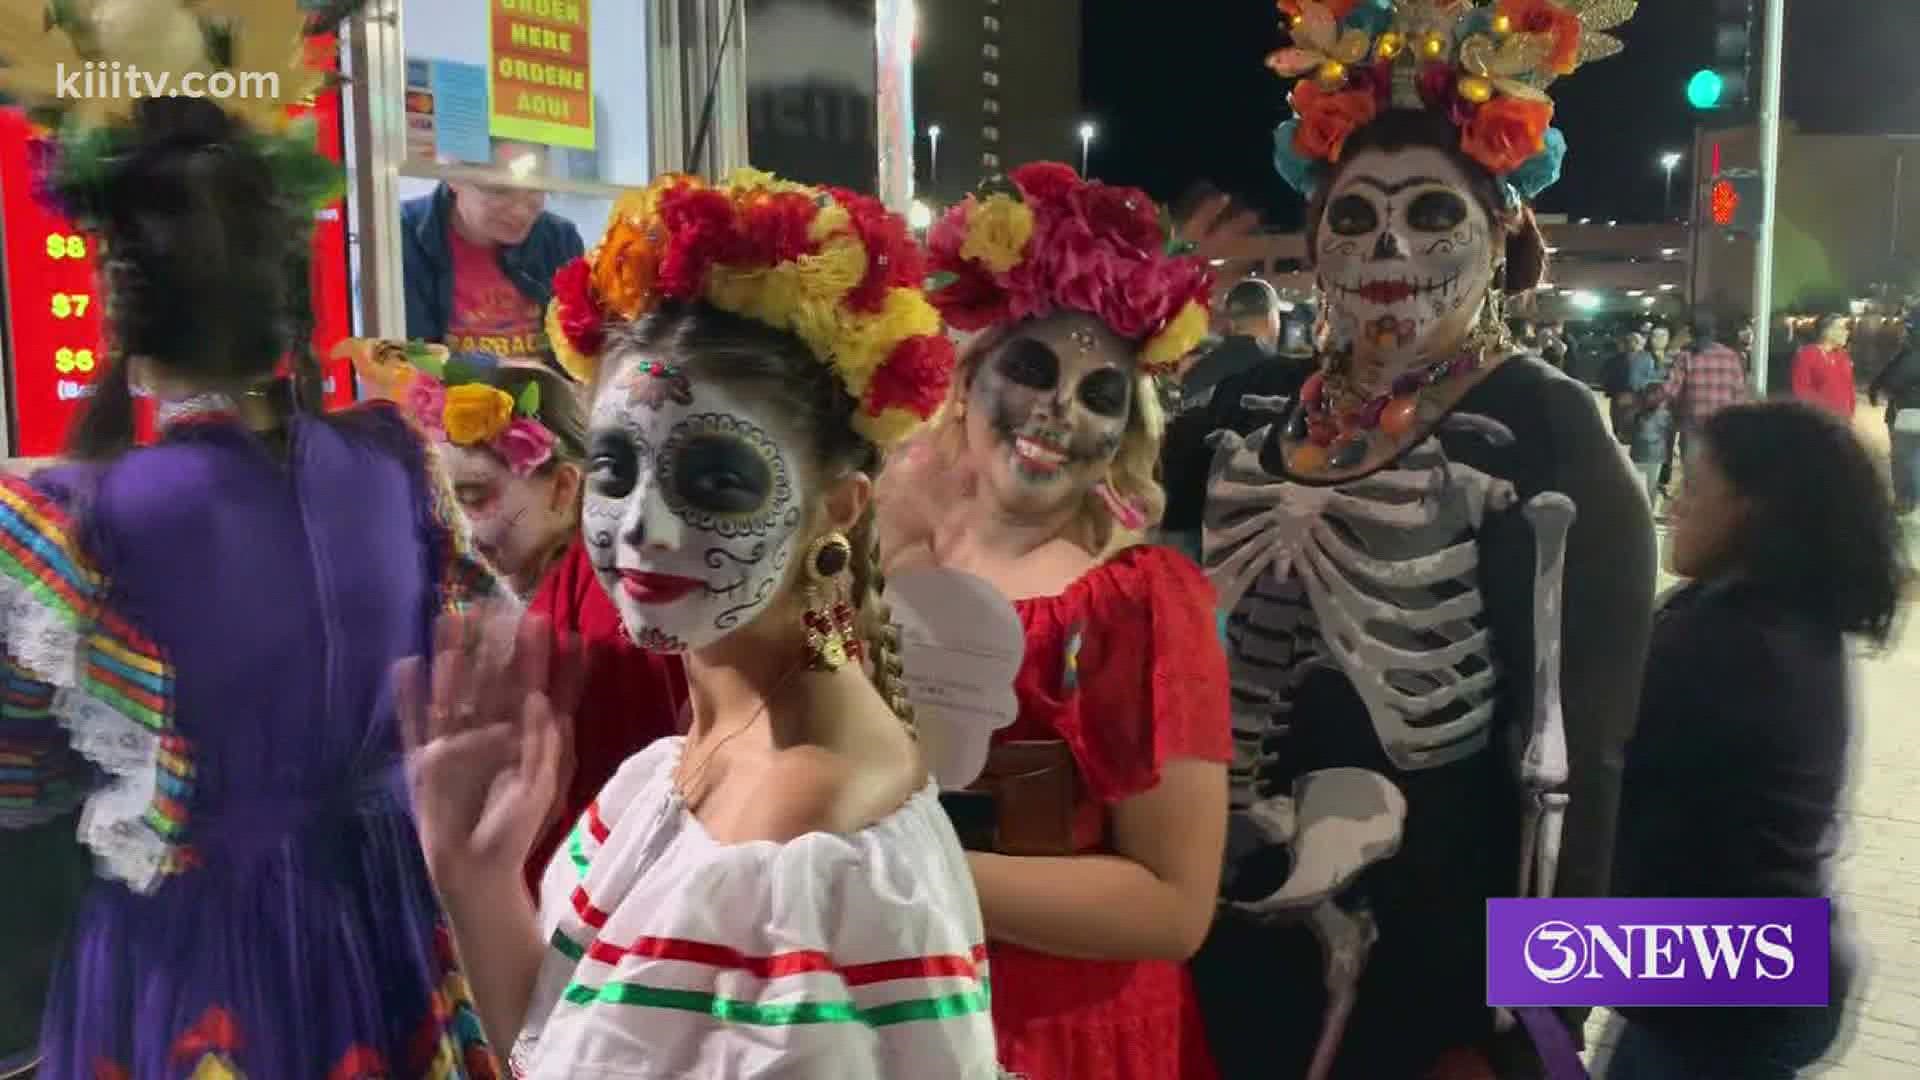 There's still other activities to do to celebrate the Day of the Dead.